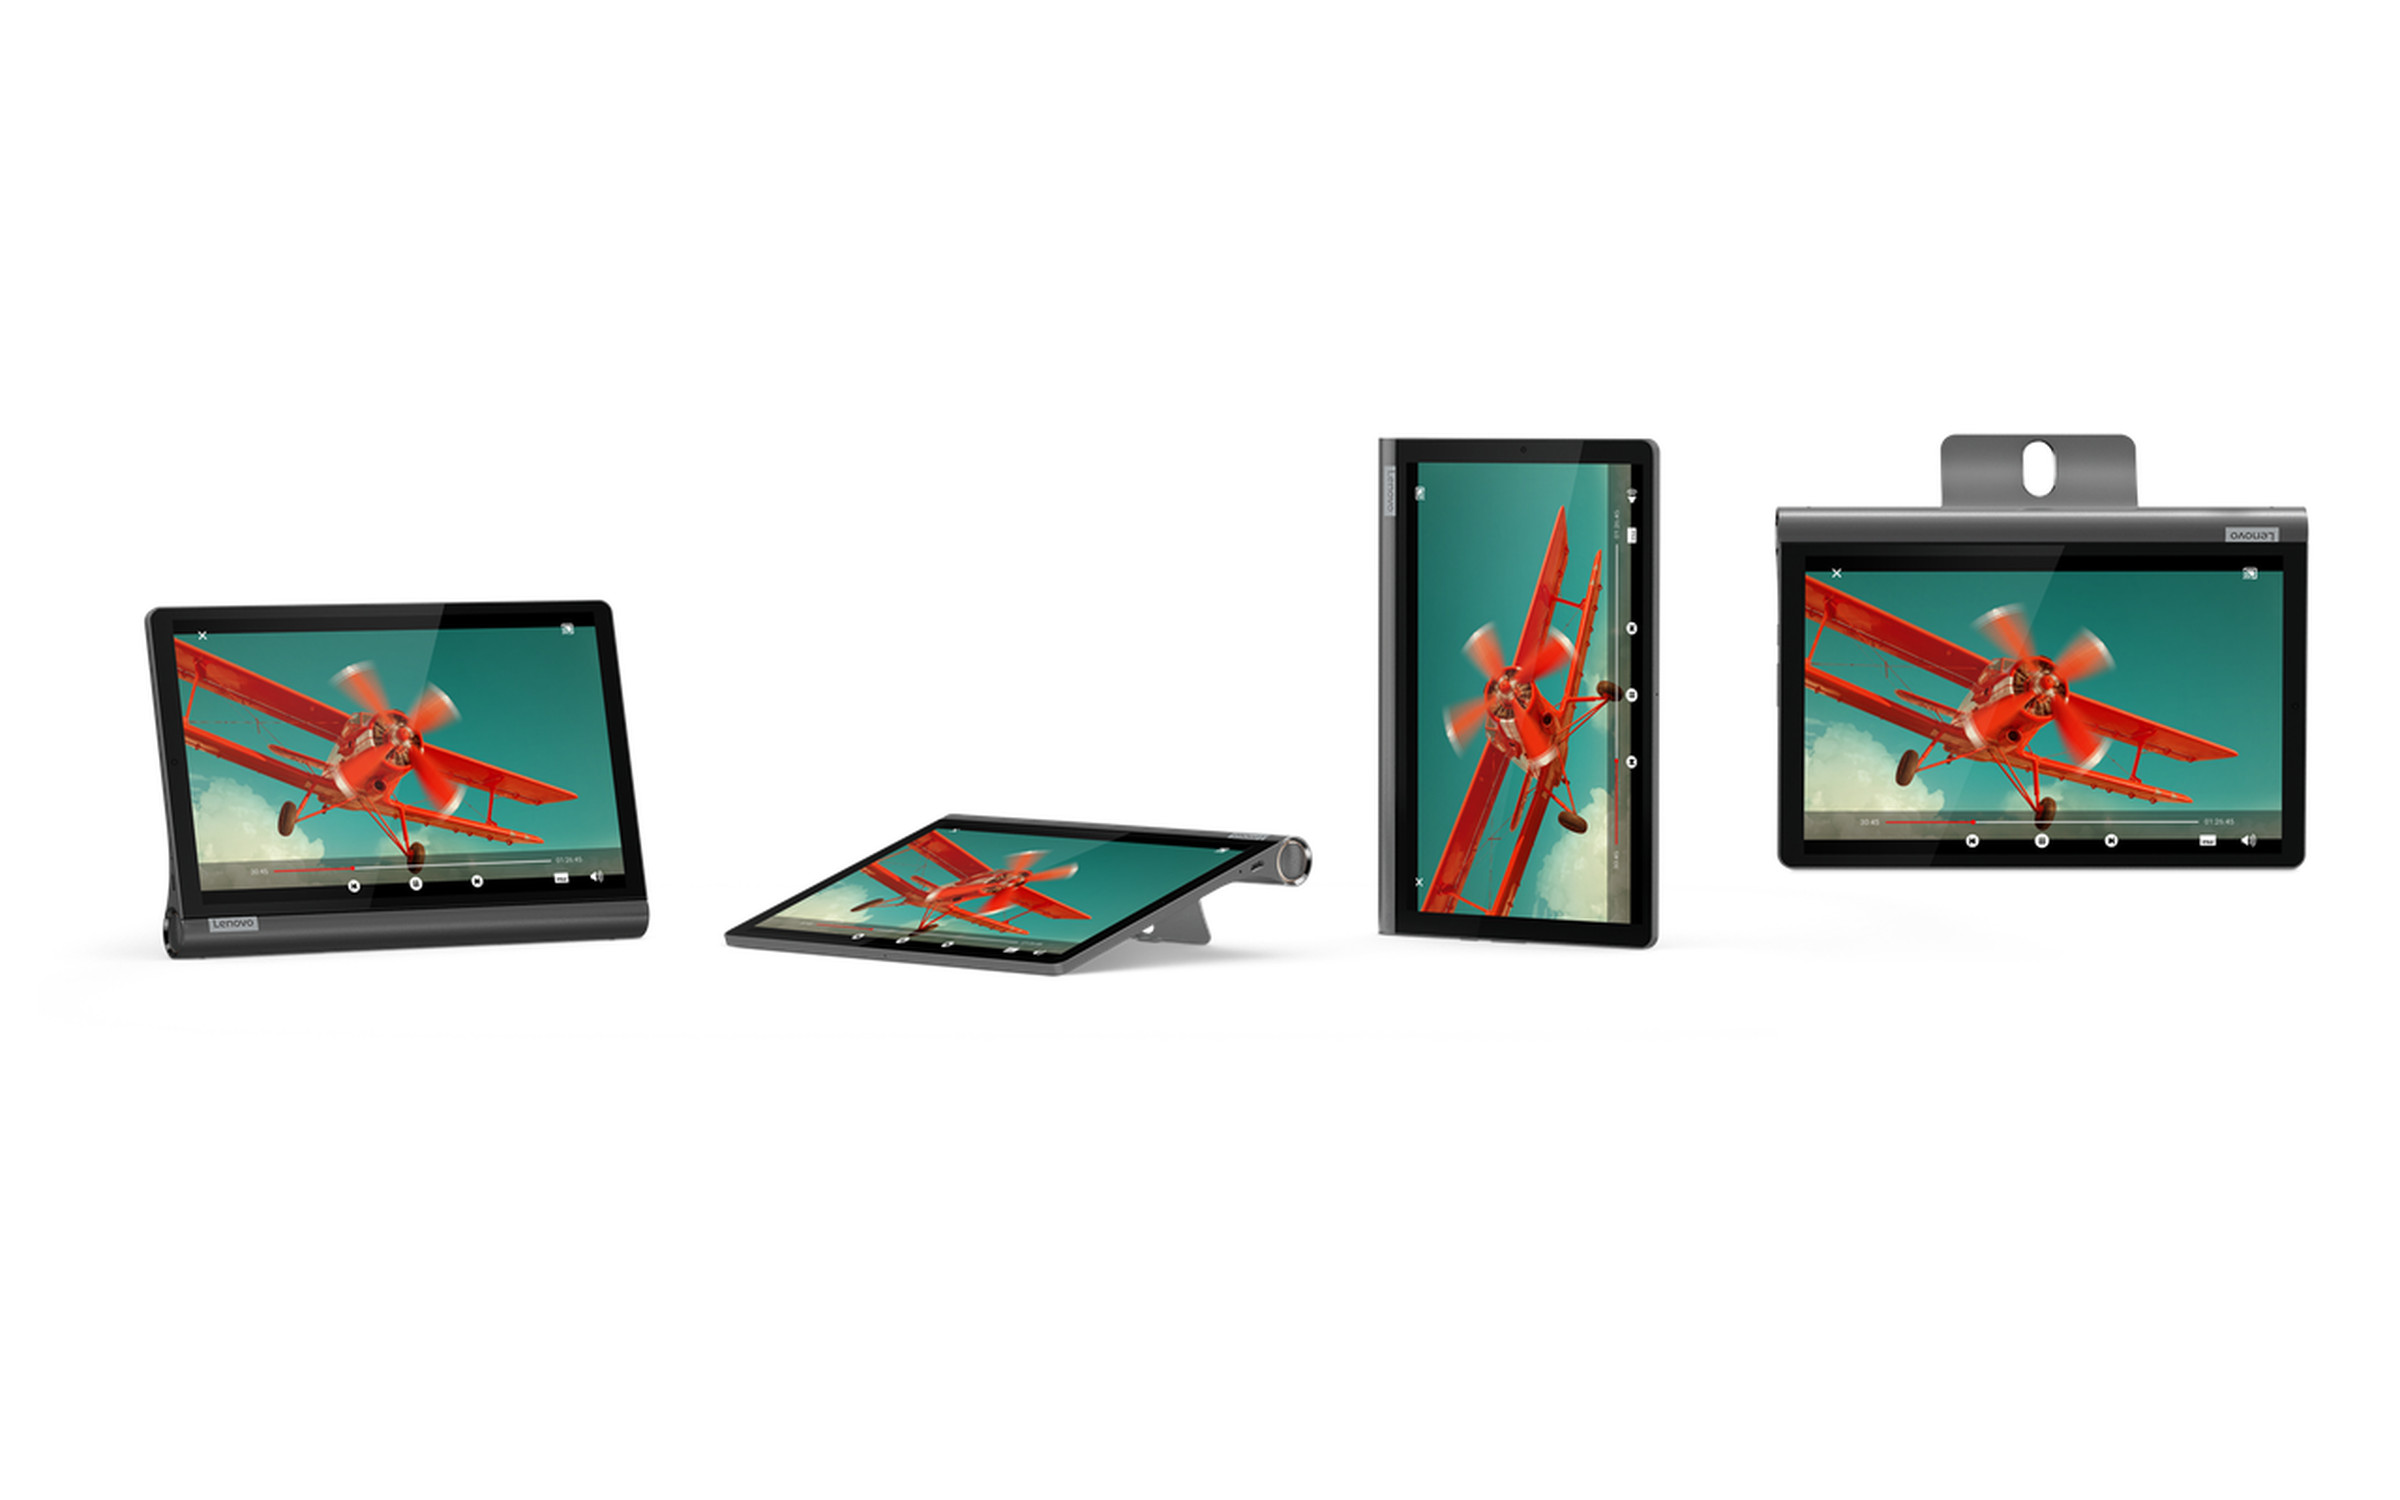 The Yoga Smart Tab’s many possible stand options